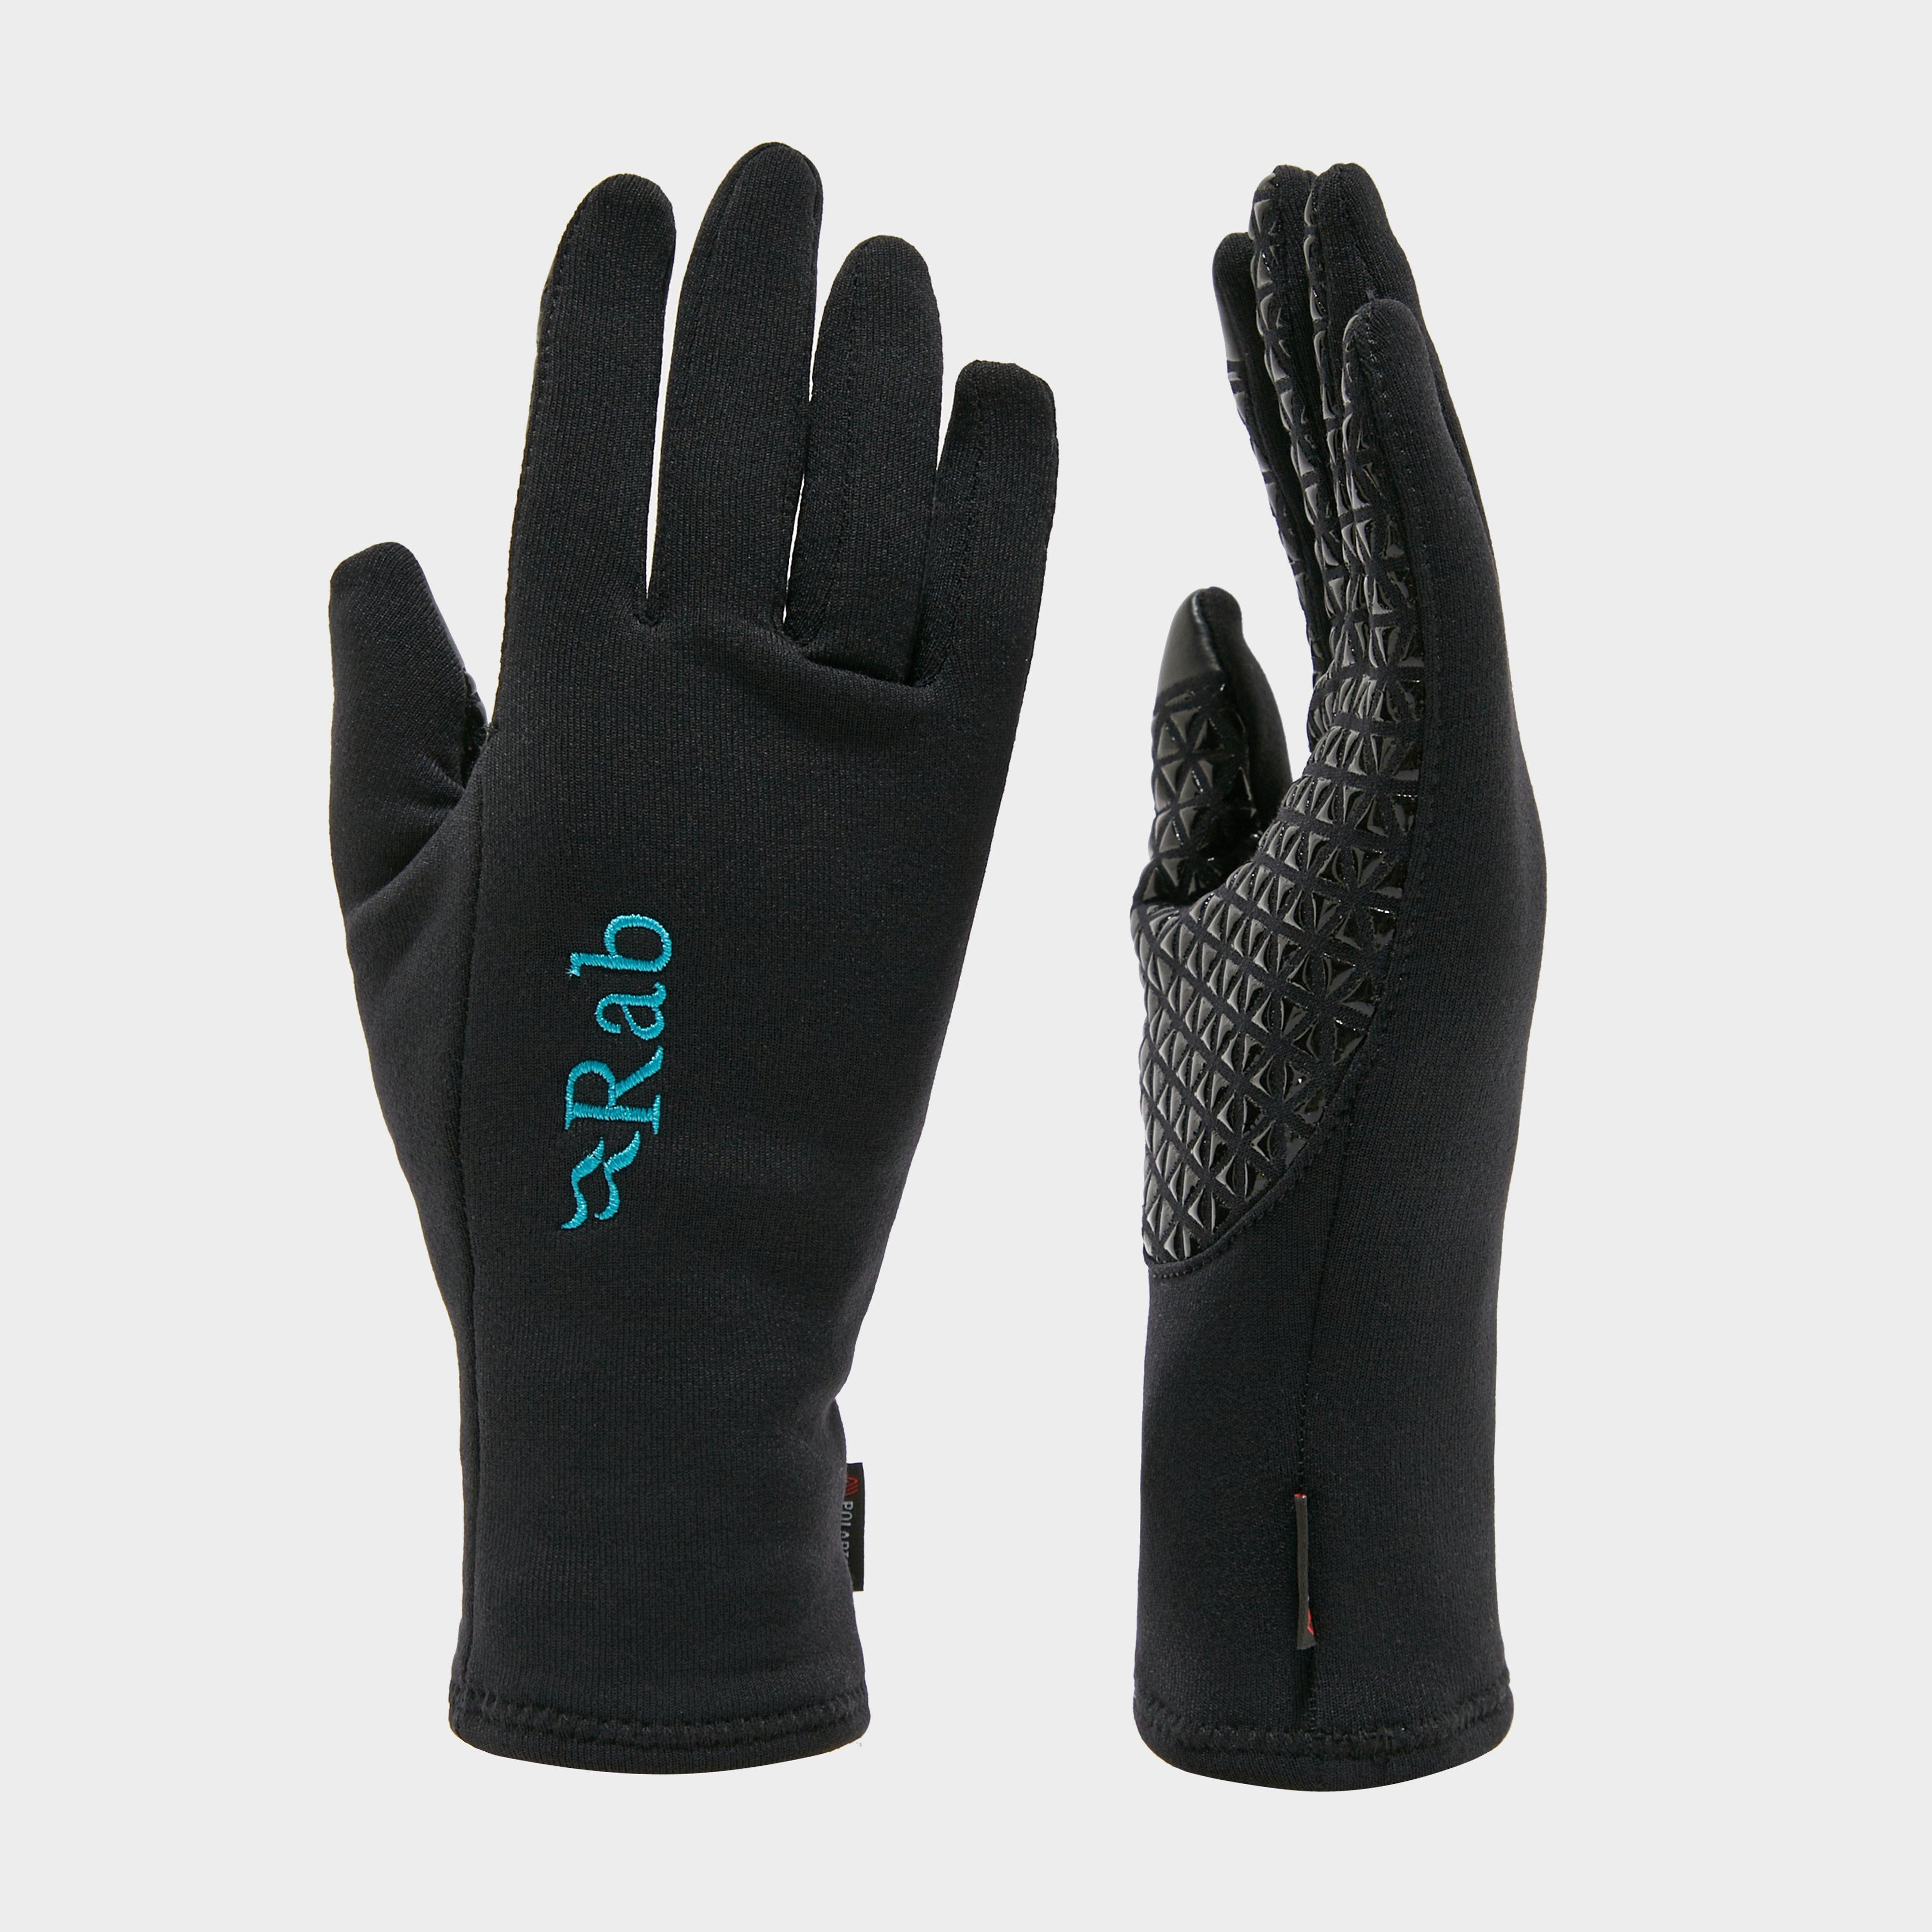 Rab Womens Power Stretch Contact Grip Gloves